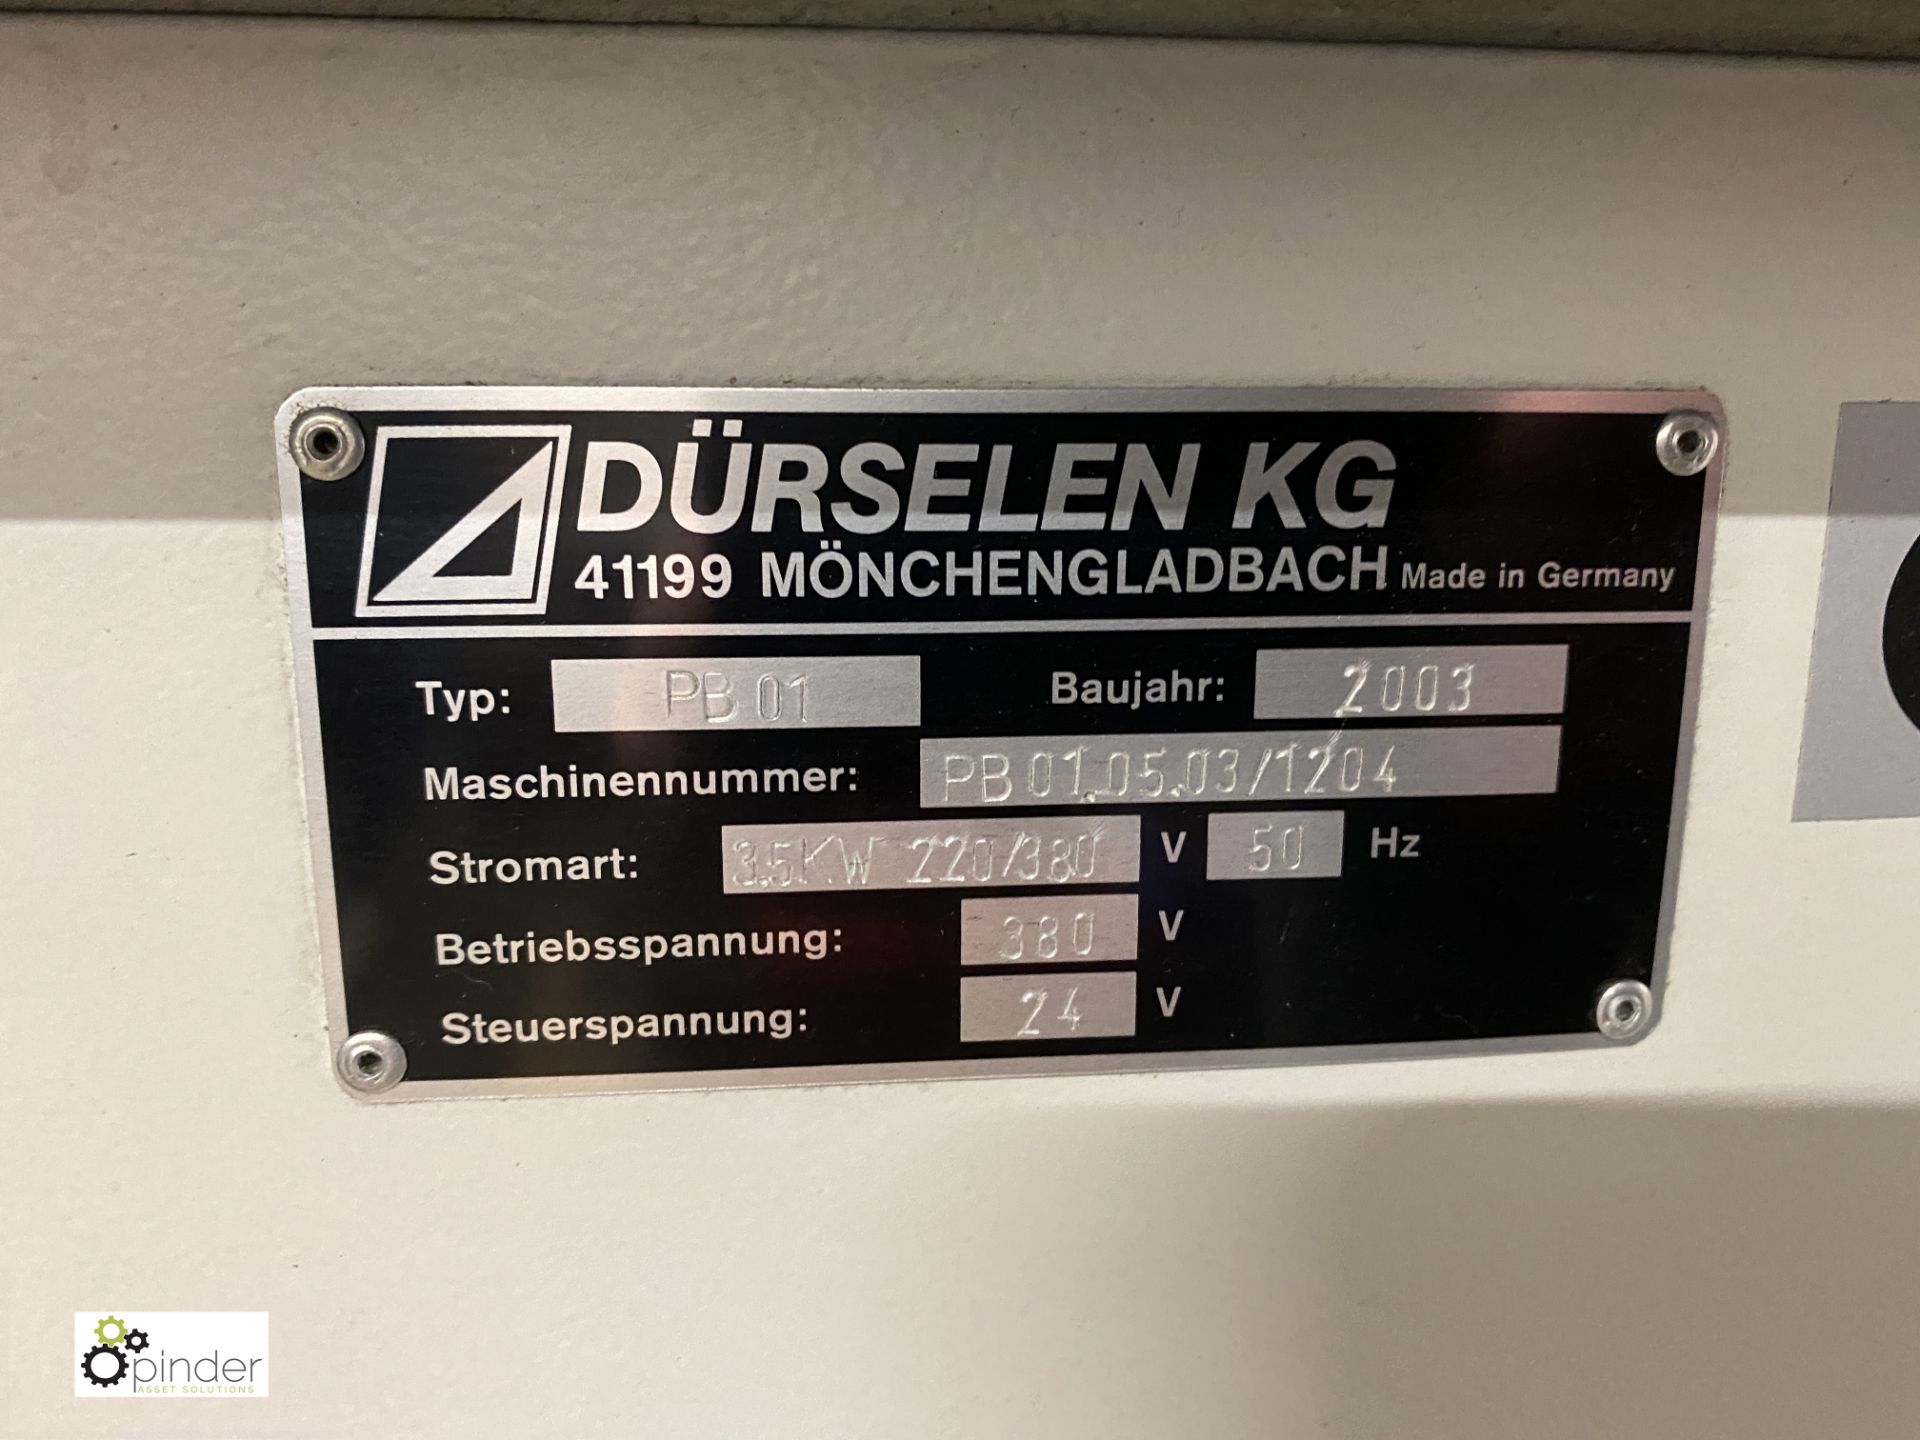 Durselen KG Type PB01 single head Paper Drill, 380volts, serial number PB01.05.03/1204, year 2003 ( - Image 3 of 6